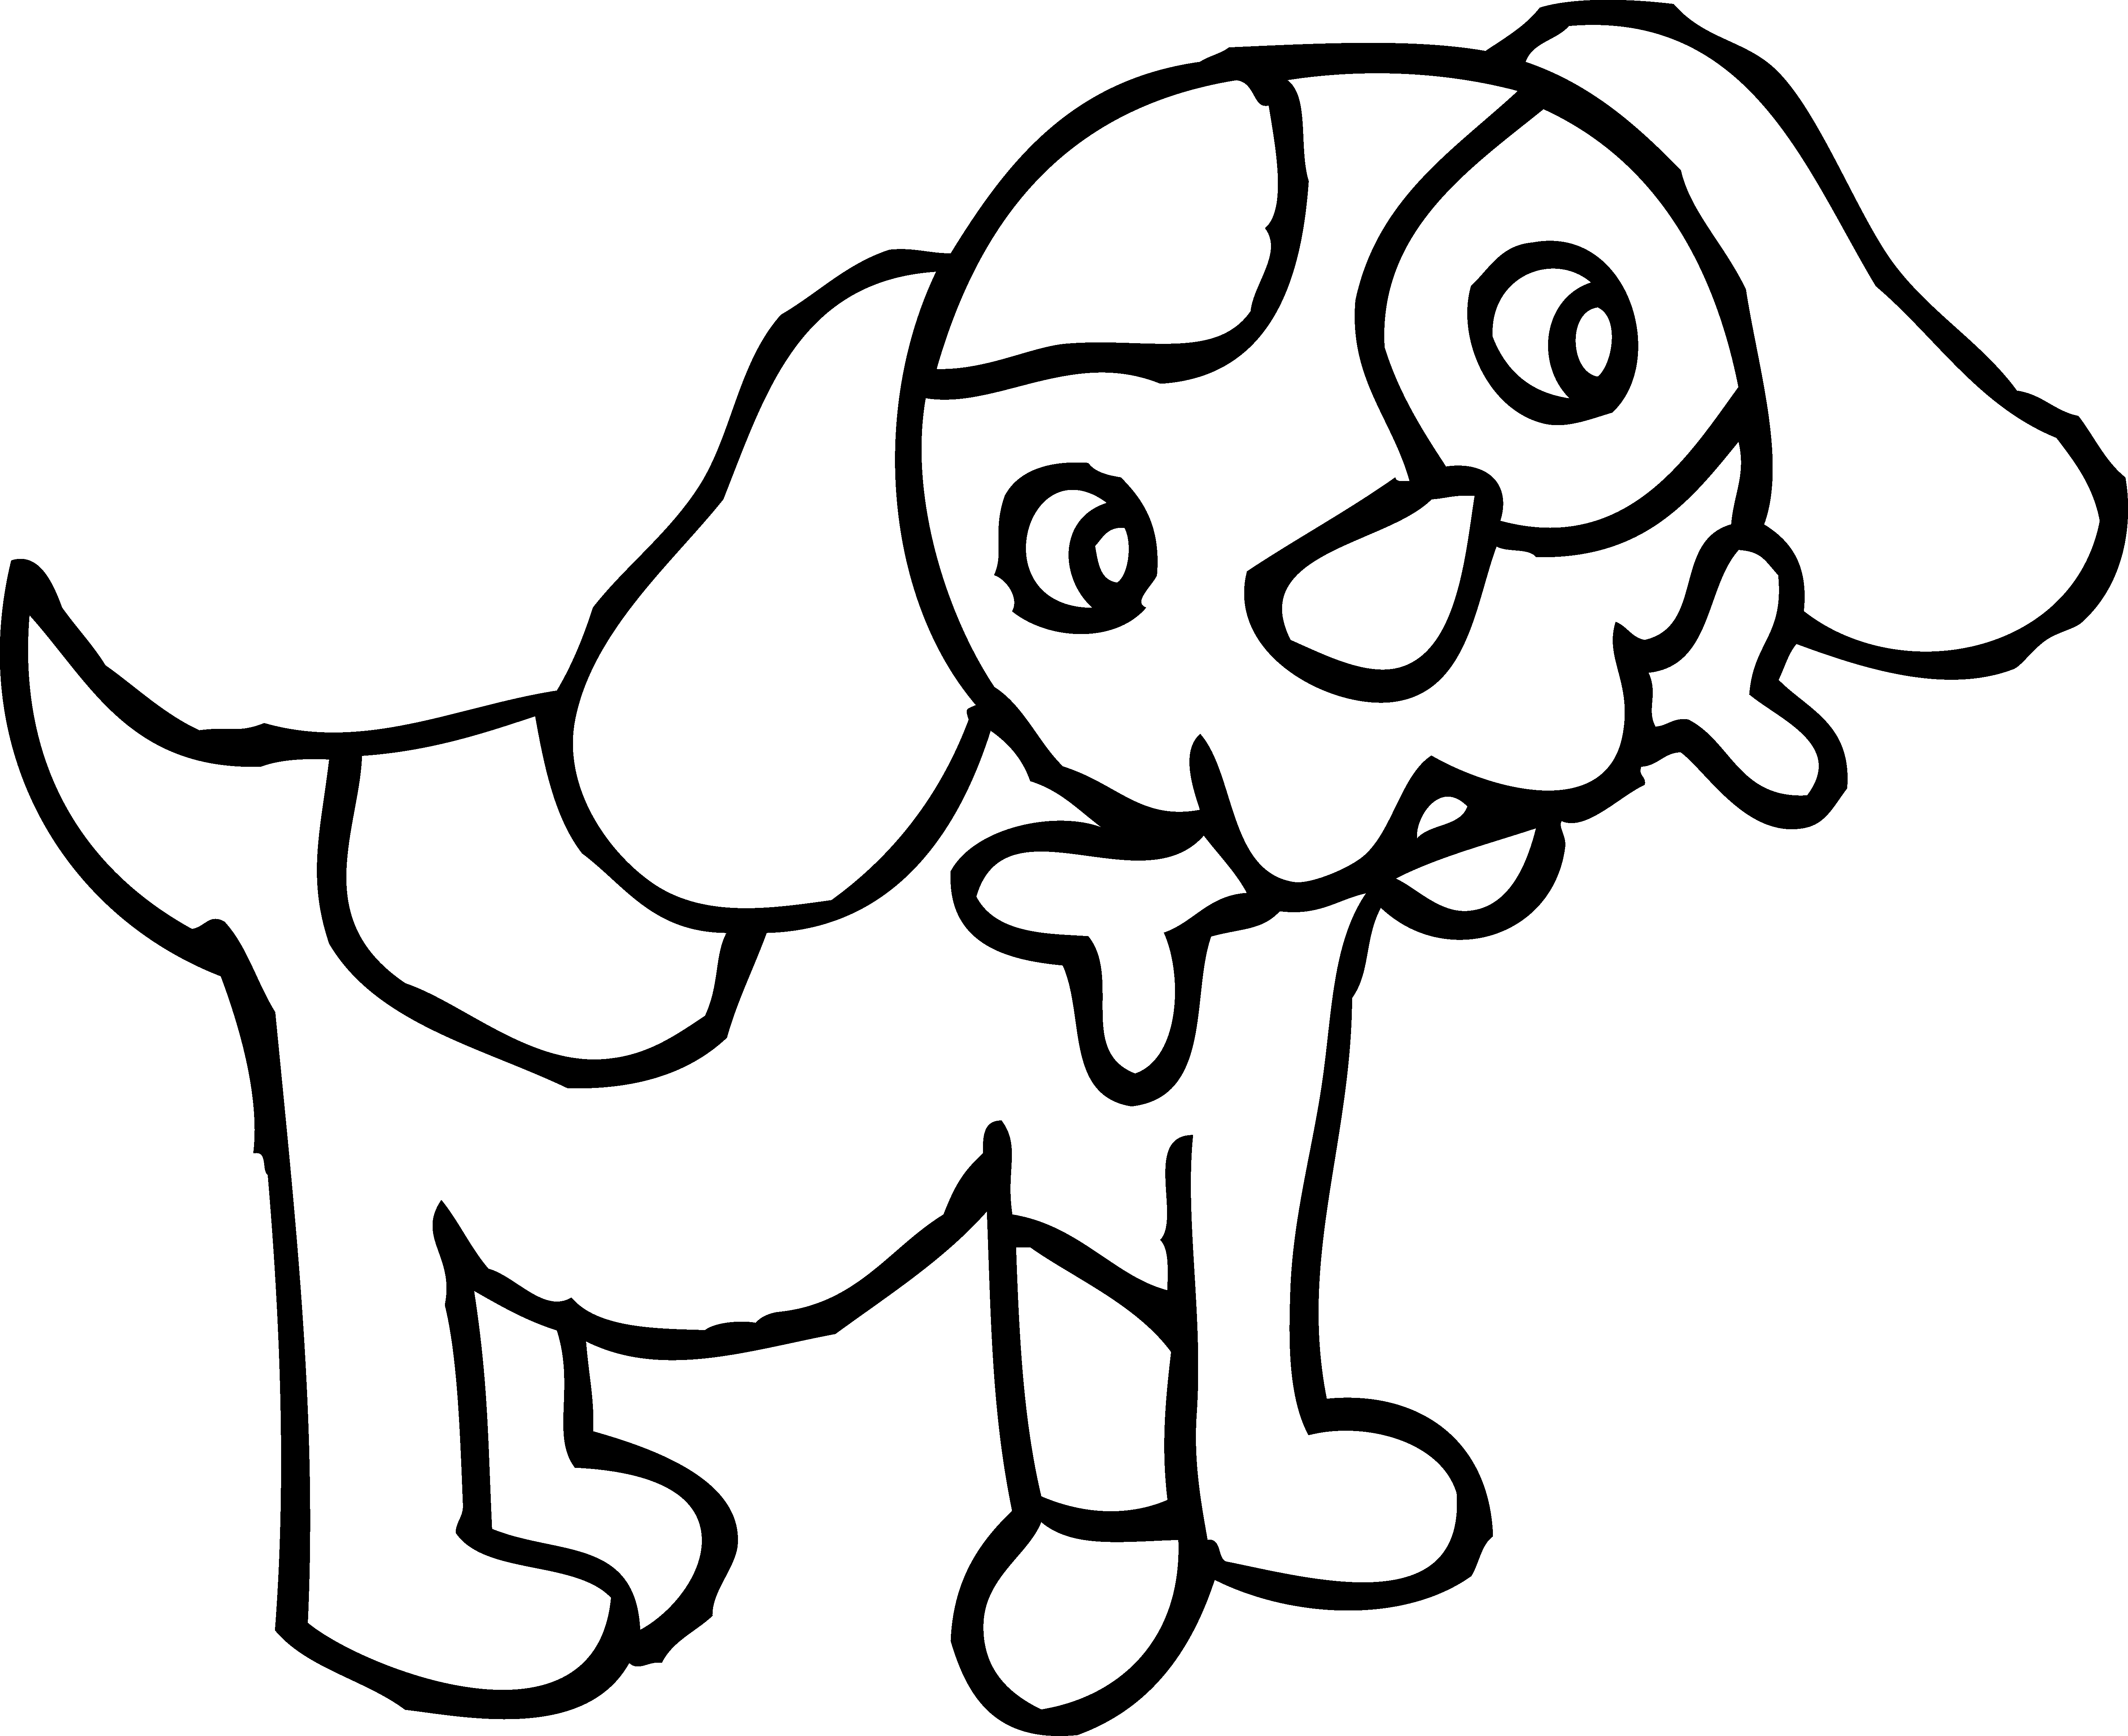 Color clipart spot. Coloring page of dog